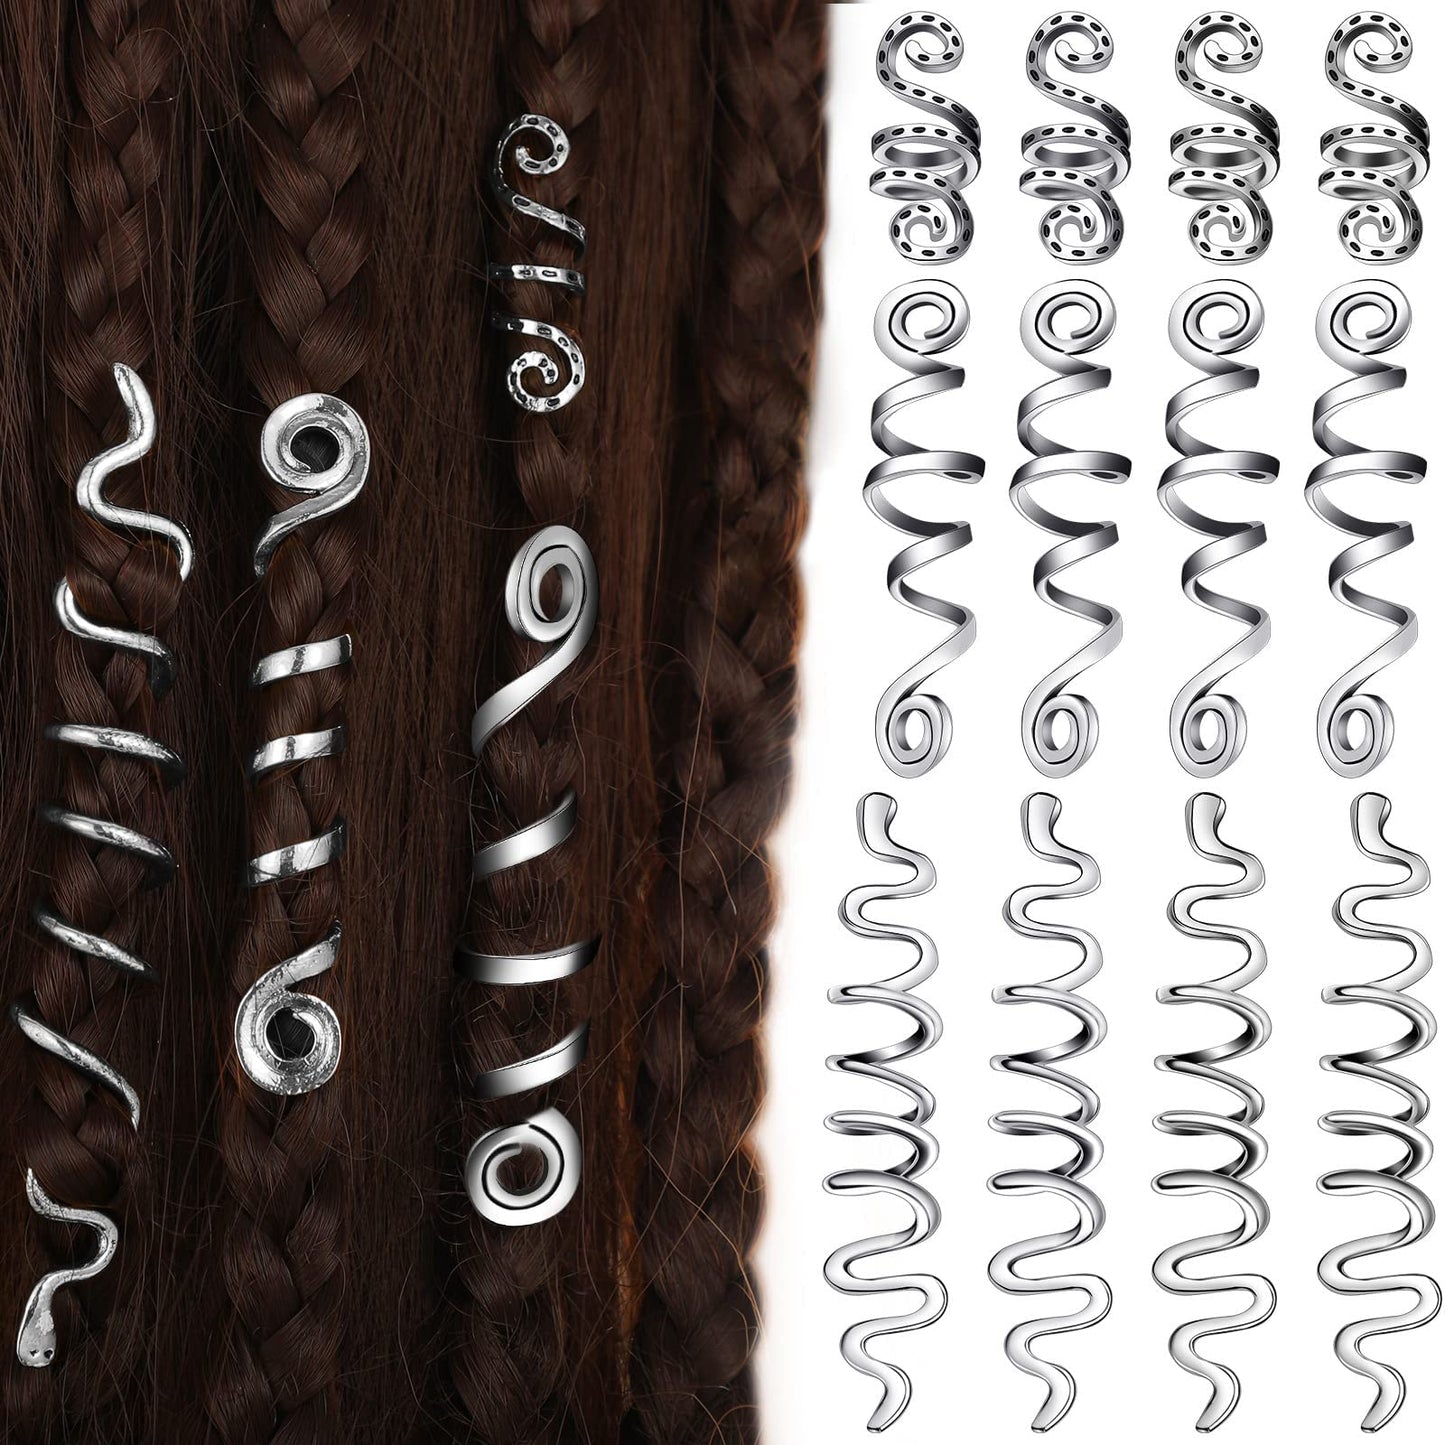 12 Pcs Braid Hair Accessories Celtic Hair Jewelry Alloy Dreadlock Accessories Loc Jewelry Hair Braid Coil Jewel Hair Cuffs Snake Hair Clips for Women and Girls (Silver, Vintage Style)